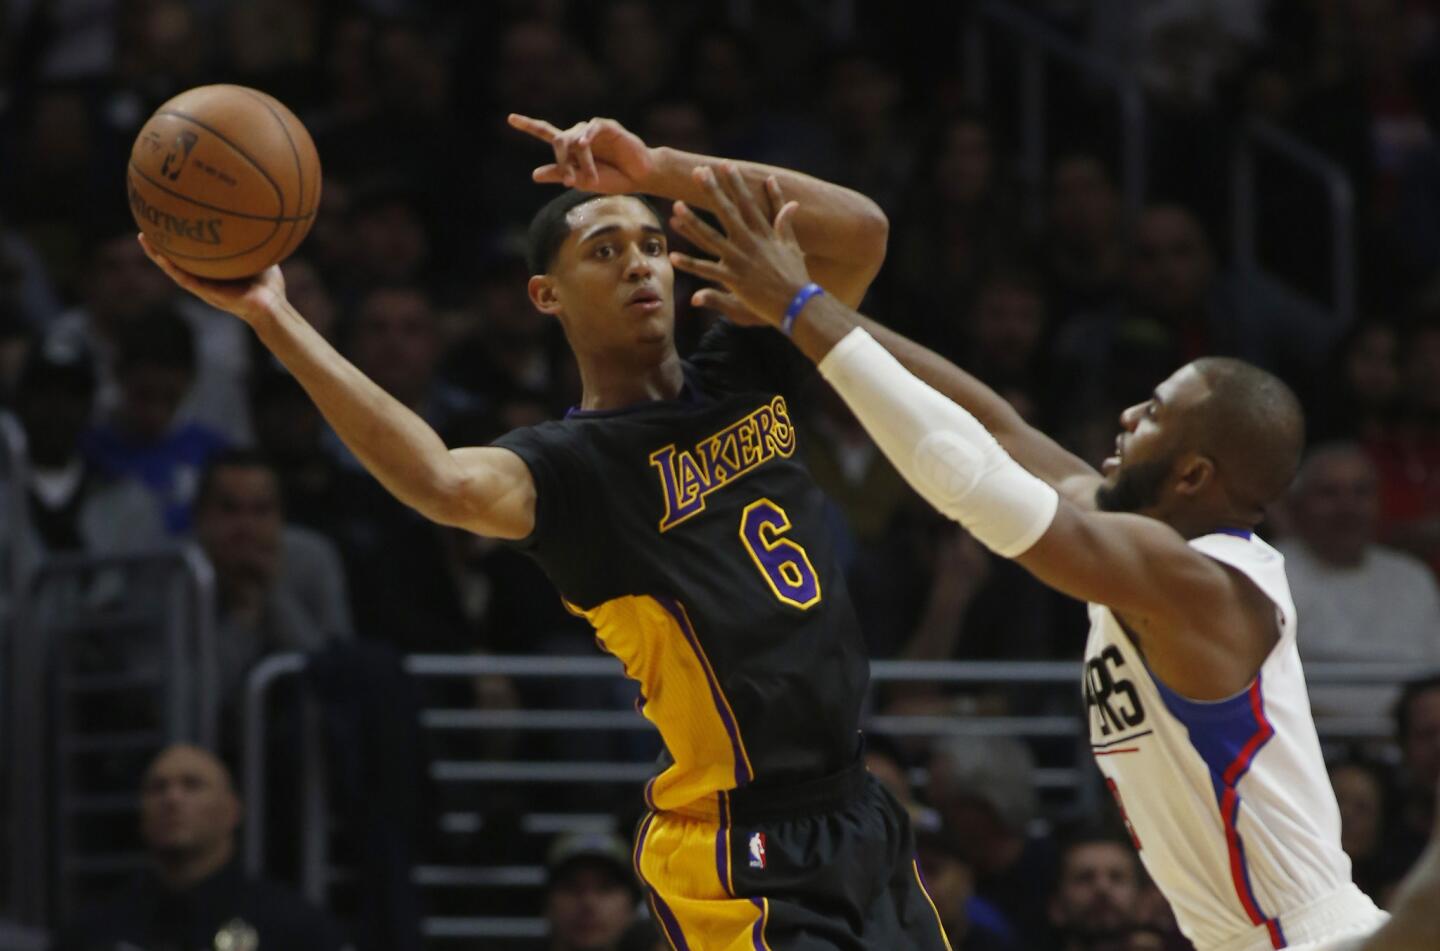 Chris Paul's 27 points lead Clippers past the Lakers, 105-93